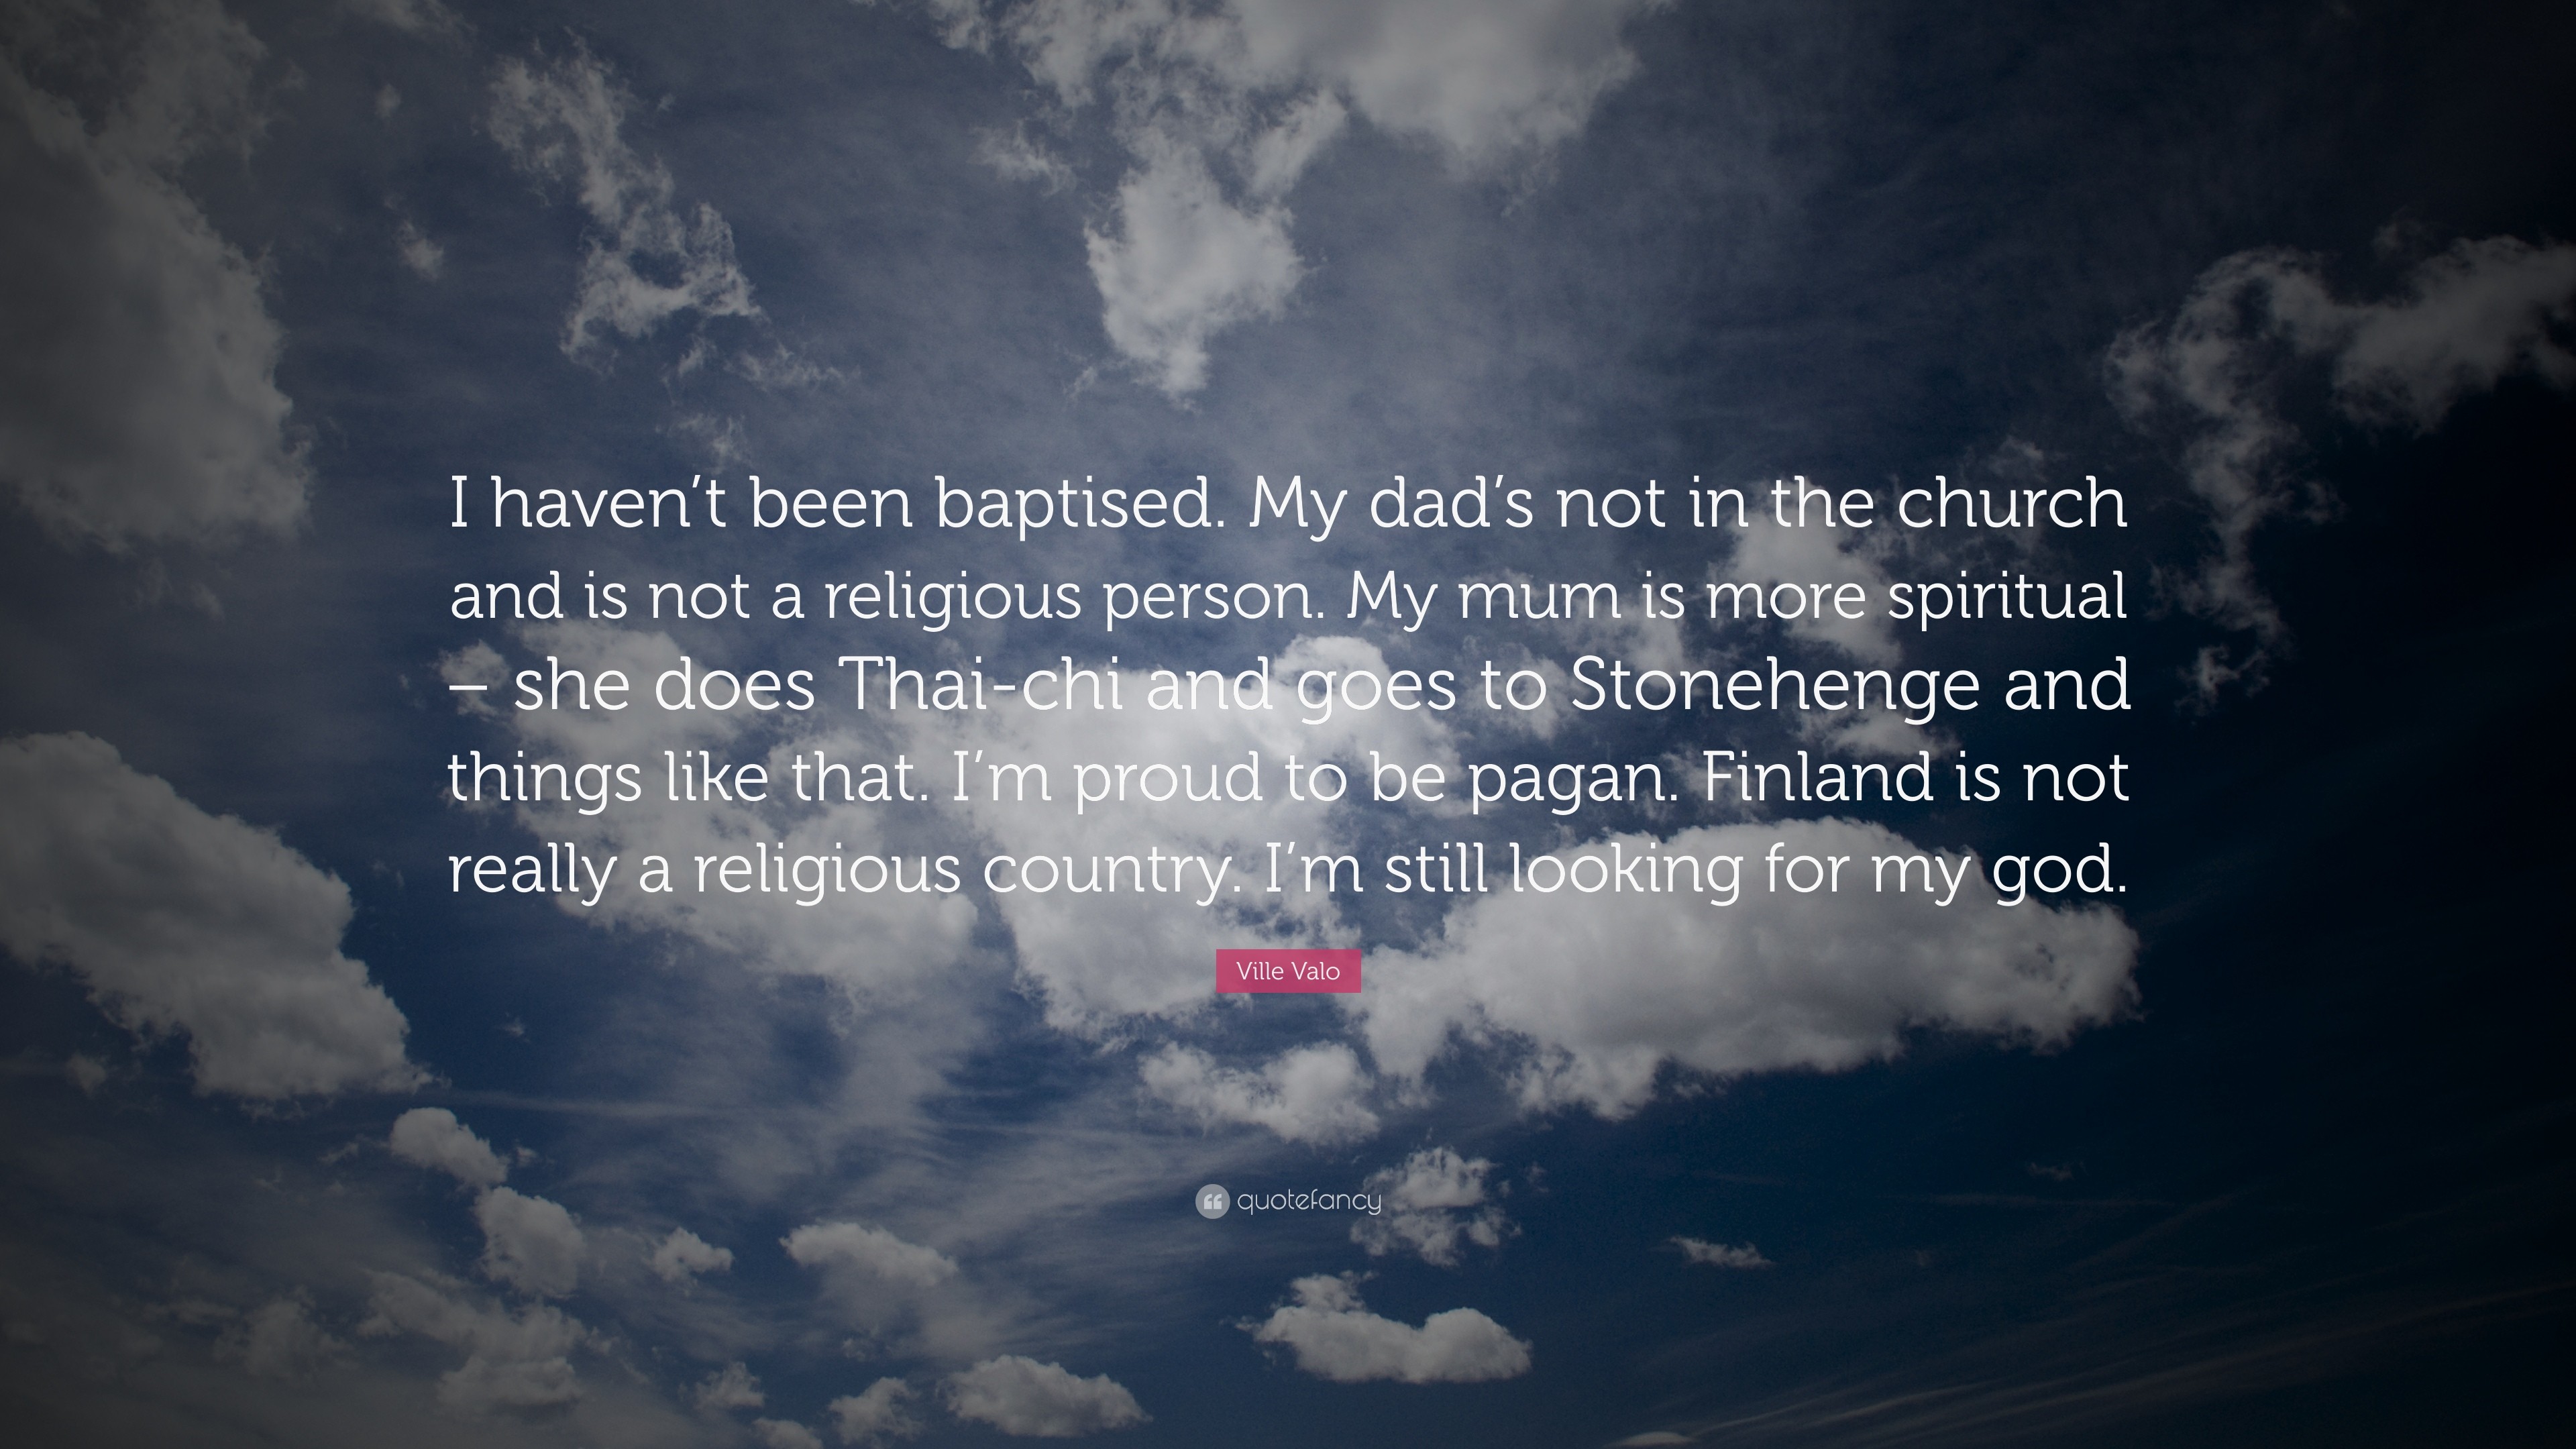 3840x2160 Ville Valo Quote: “I haven't been baptised. My dad's not in